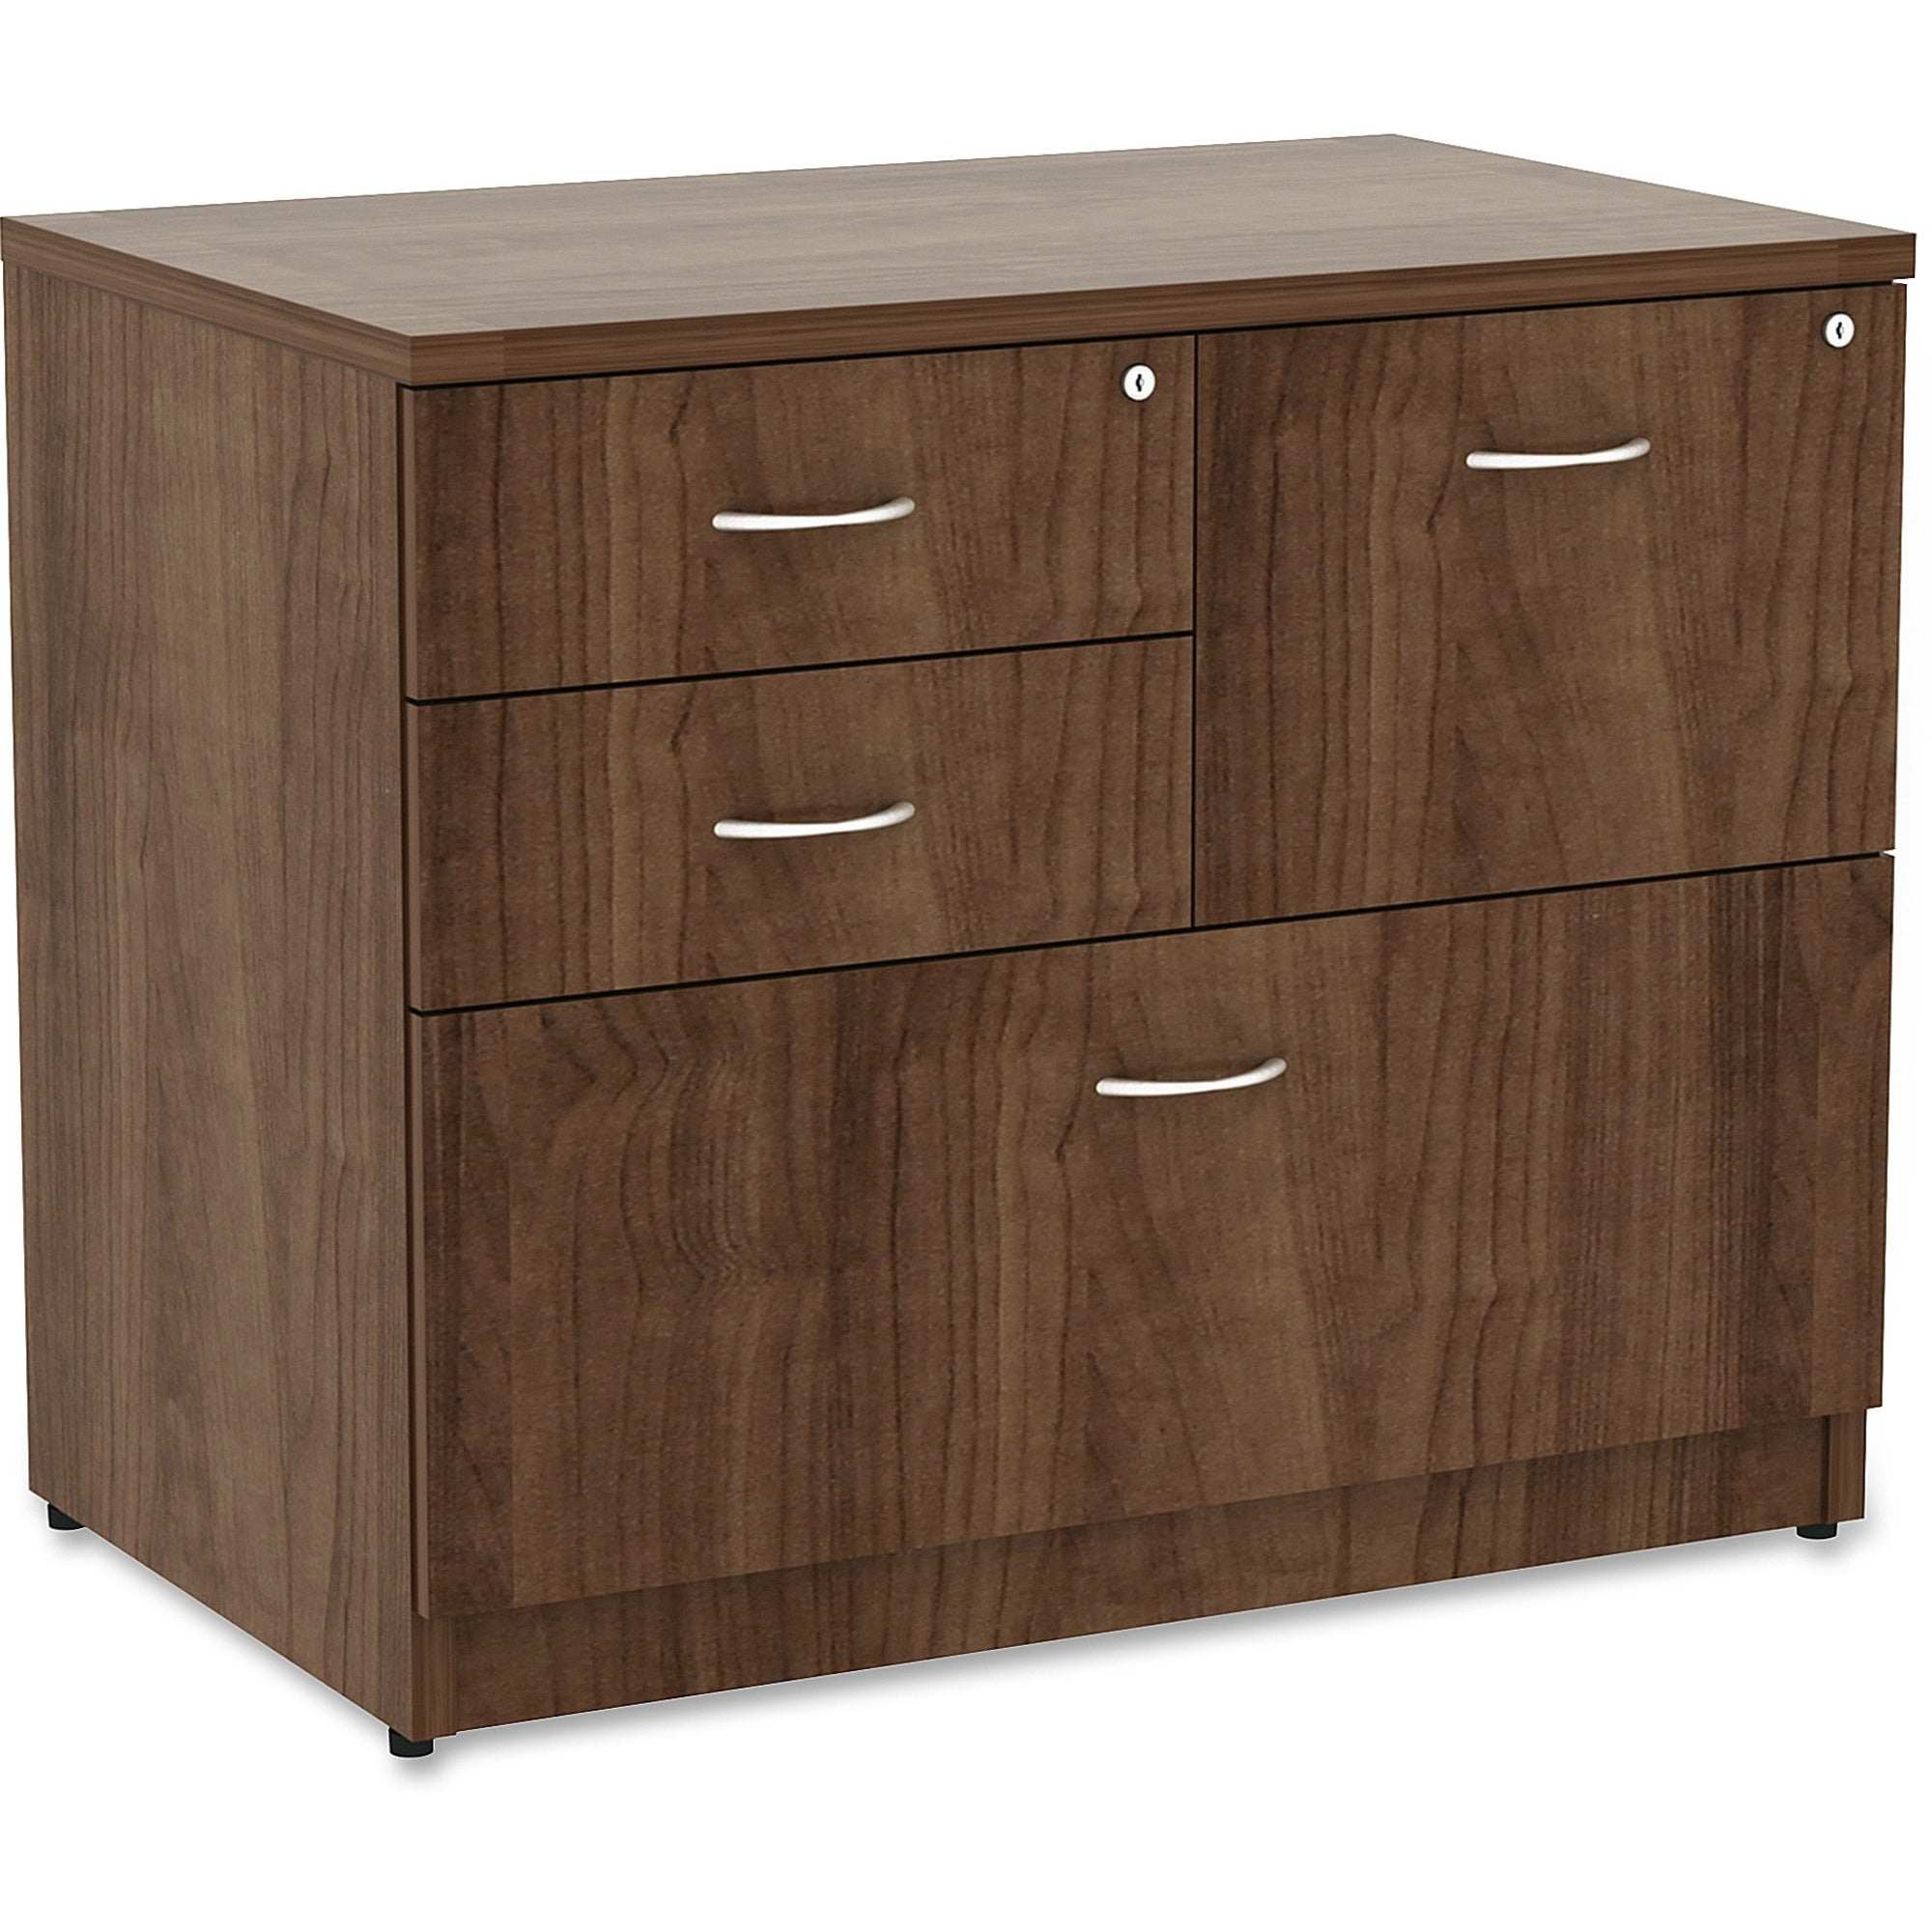 lorell-essentials-series-box-box-file-lateral-file-1-side-panel-01-edge-355-x-22295-lateral-file-4-x-box-file-drawers-walnut-laminate-table-top-versatile-ball-bearing-glide-drawer-extension-security-lock-durable-adjustable-l_llr69542 - 1